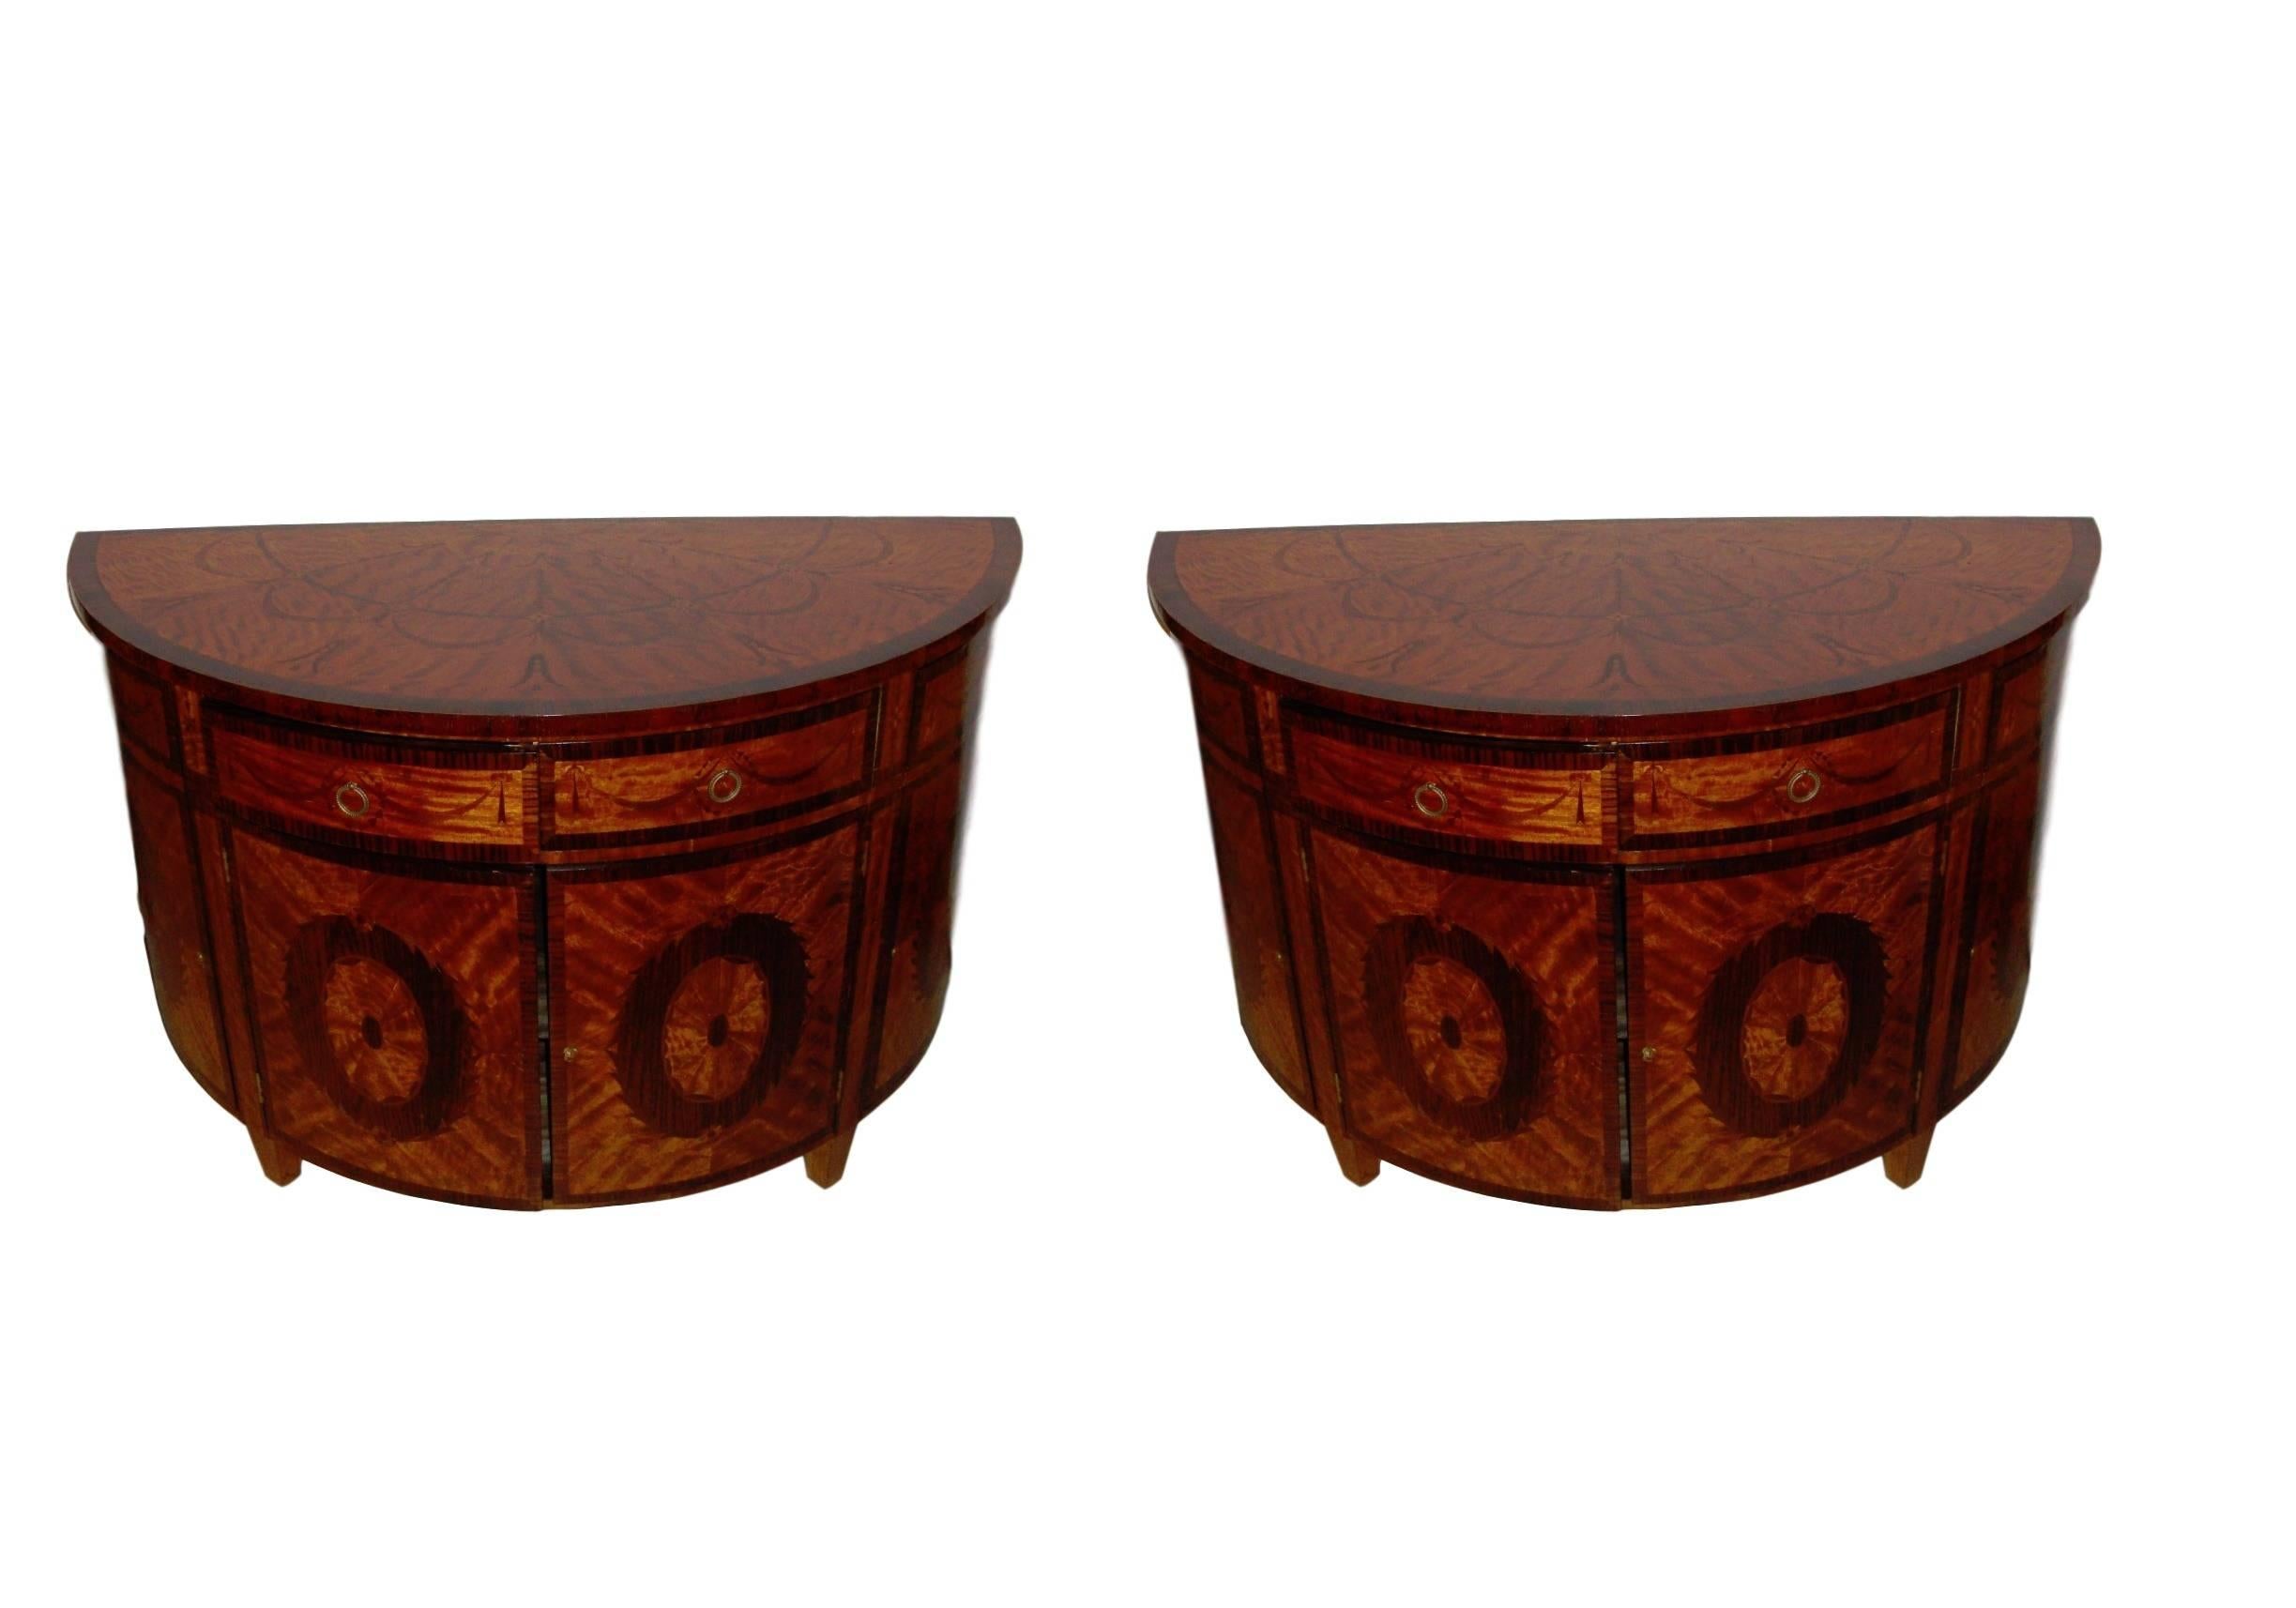 Adam Style Pair of Demilune Console Tables